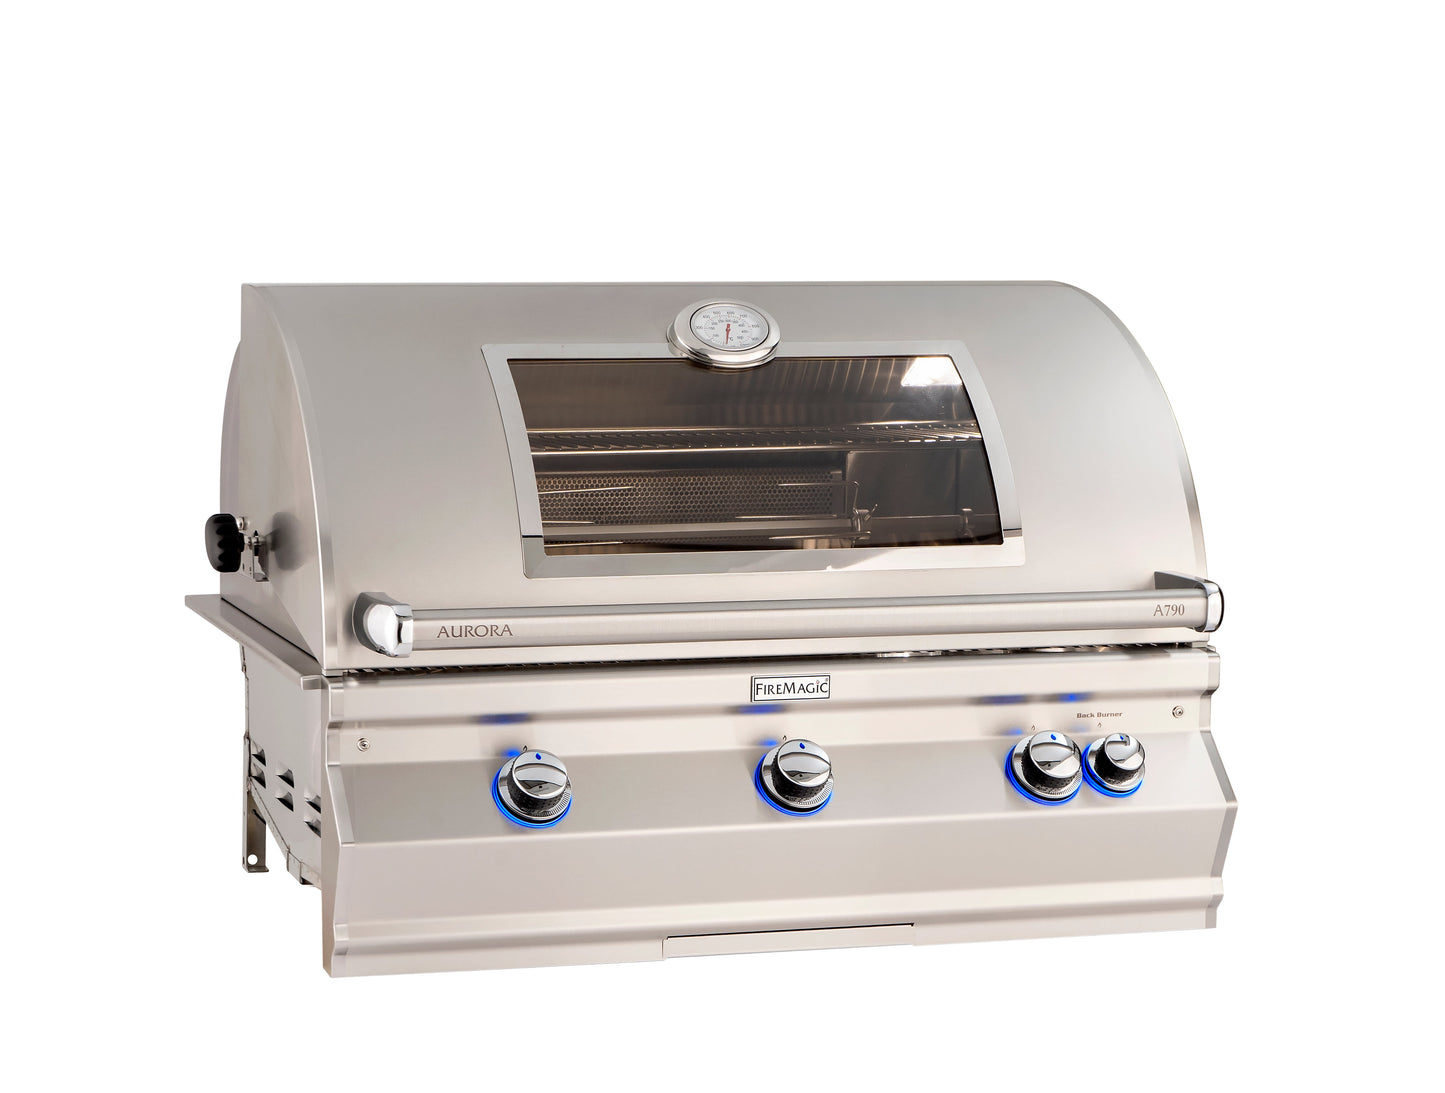 Firemagic Aurora 30 Inch Built-In Gas Grill with Magic Viewing Window | A660i-8EAN-W |